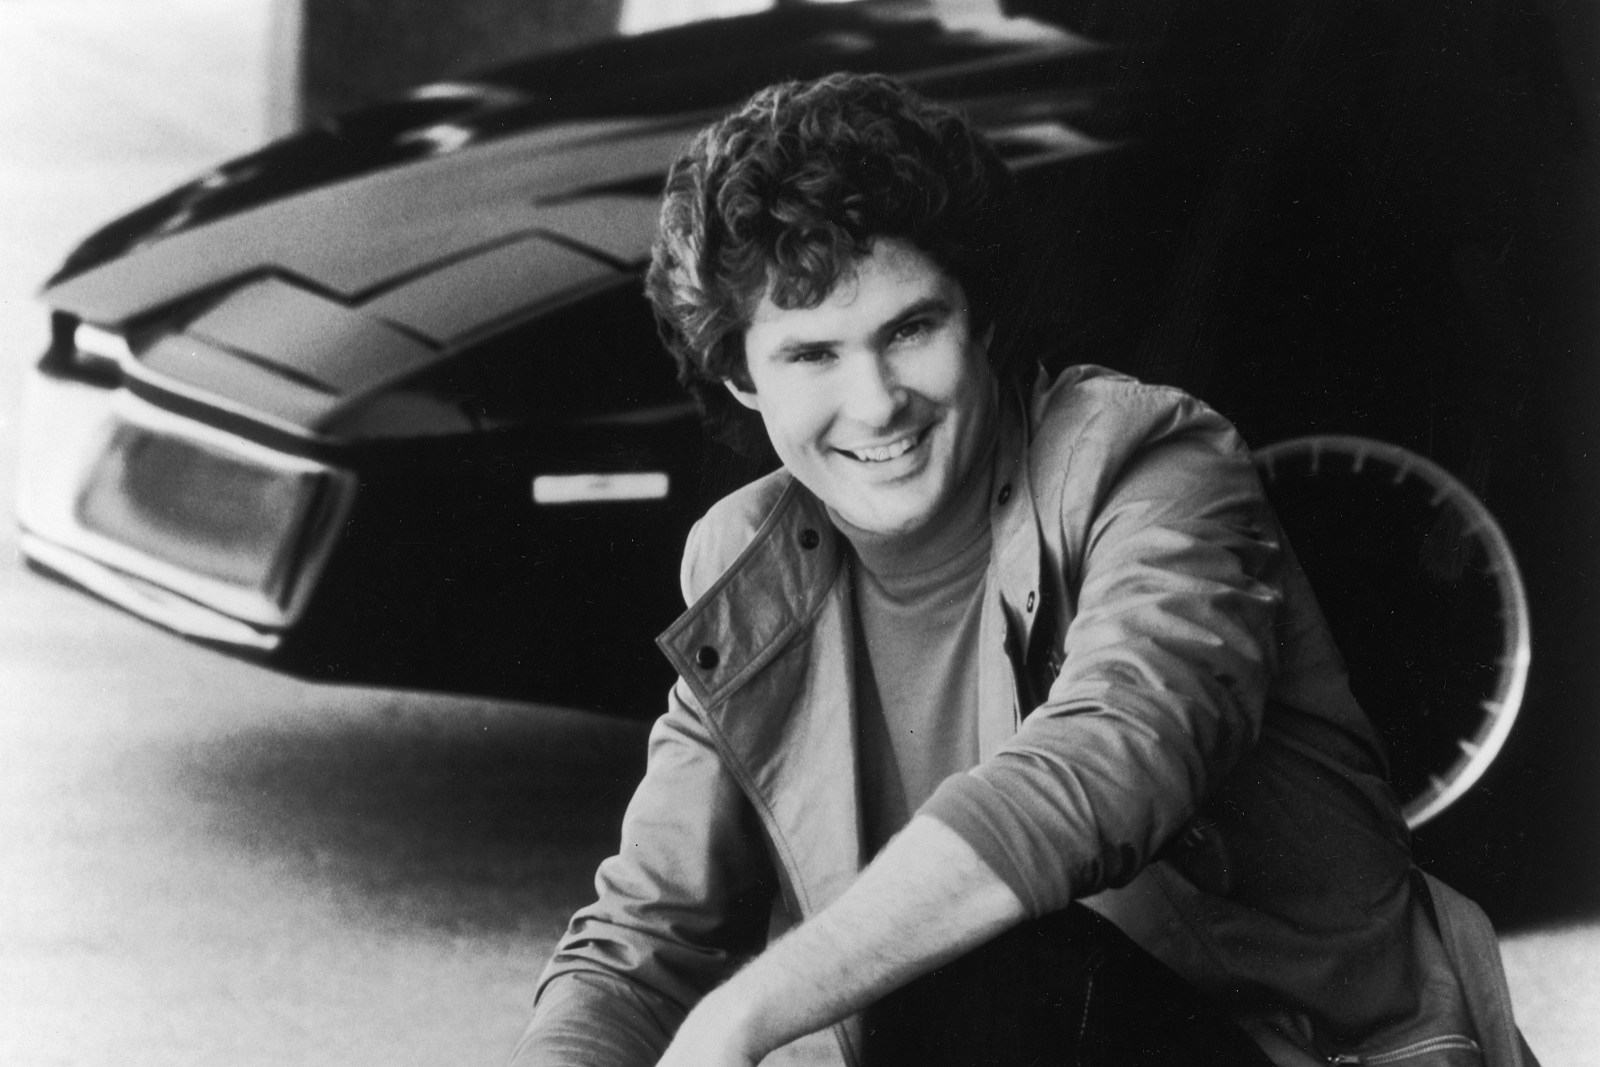 35 Years Ago: 'Knight Rider' Runs Out of Gas